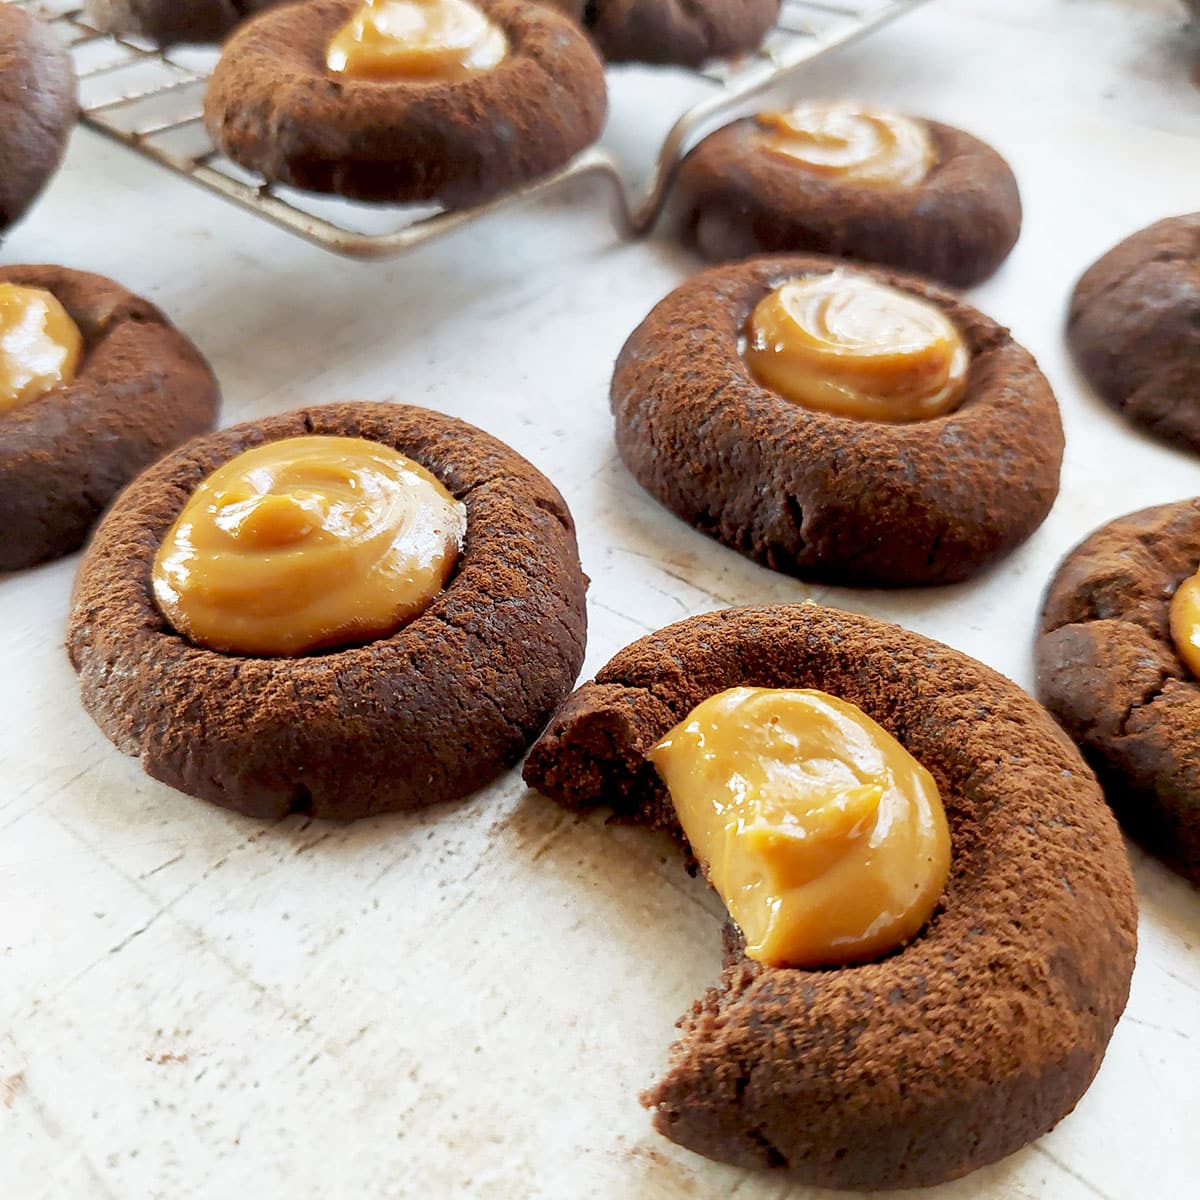 These Chocolate Caramel Butter Cookies are super easy to make. Made with a rich chocolate cookie dough, then filled with caramel, they are indulgently delicious.